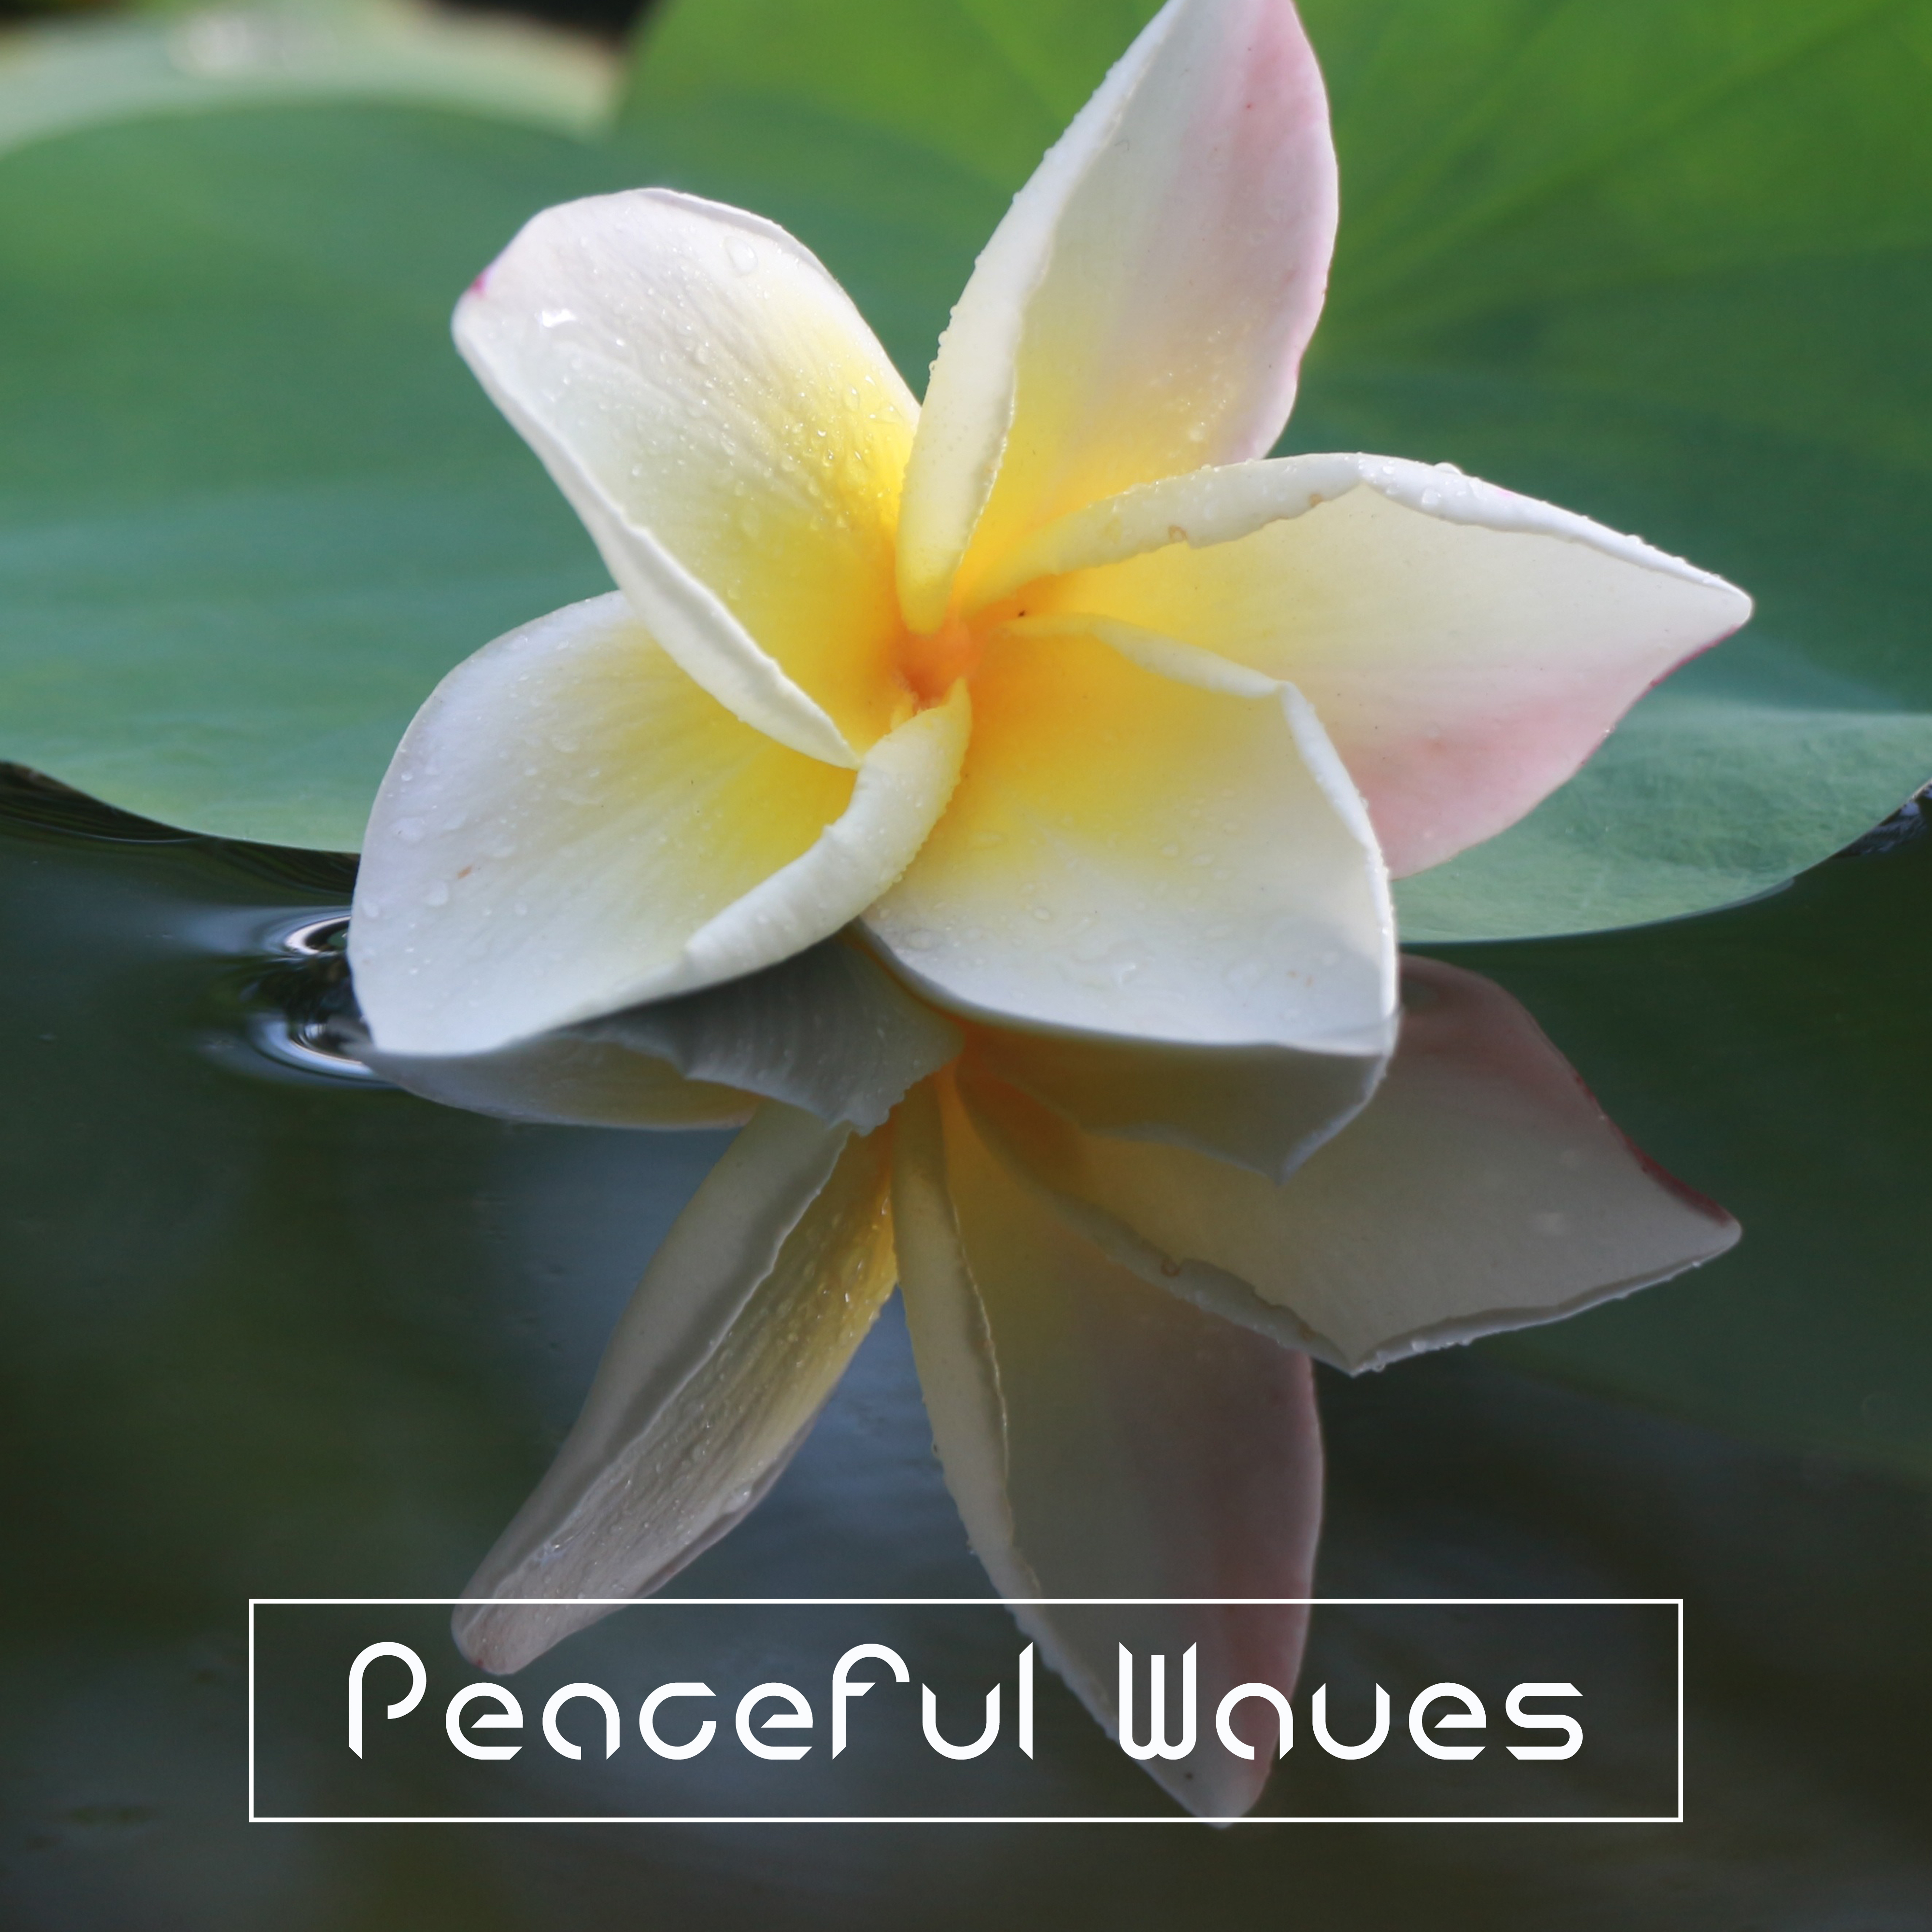 Peaceful Waves  Spa Music, Relaxation Wellness, Stress Free, Nature Sounds for Massage, Pure Spa, Soothing Water, Calm Down